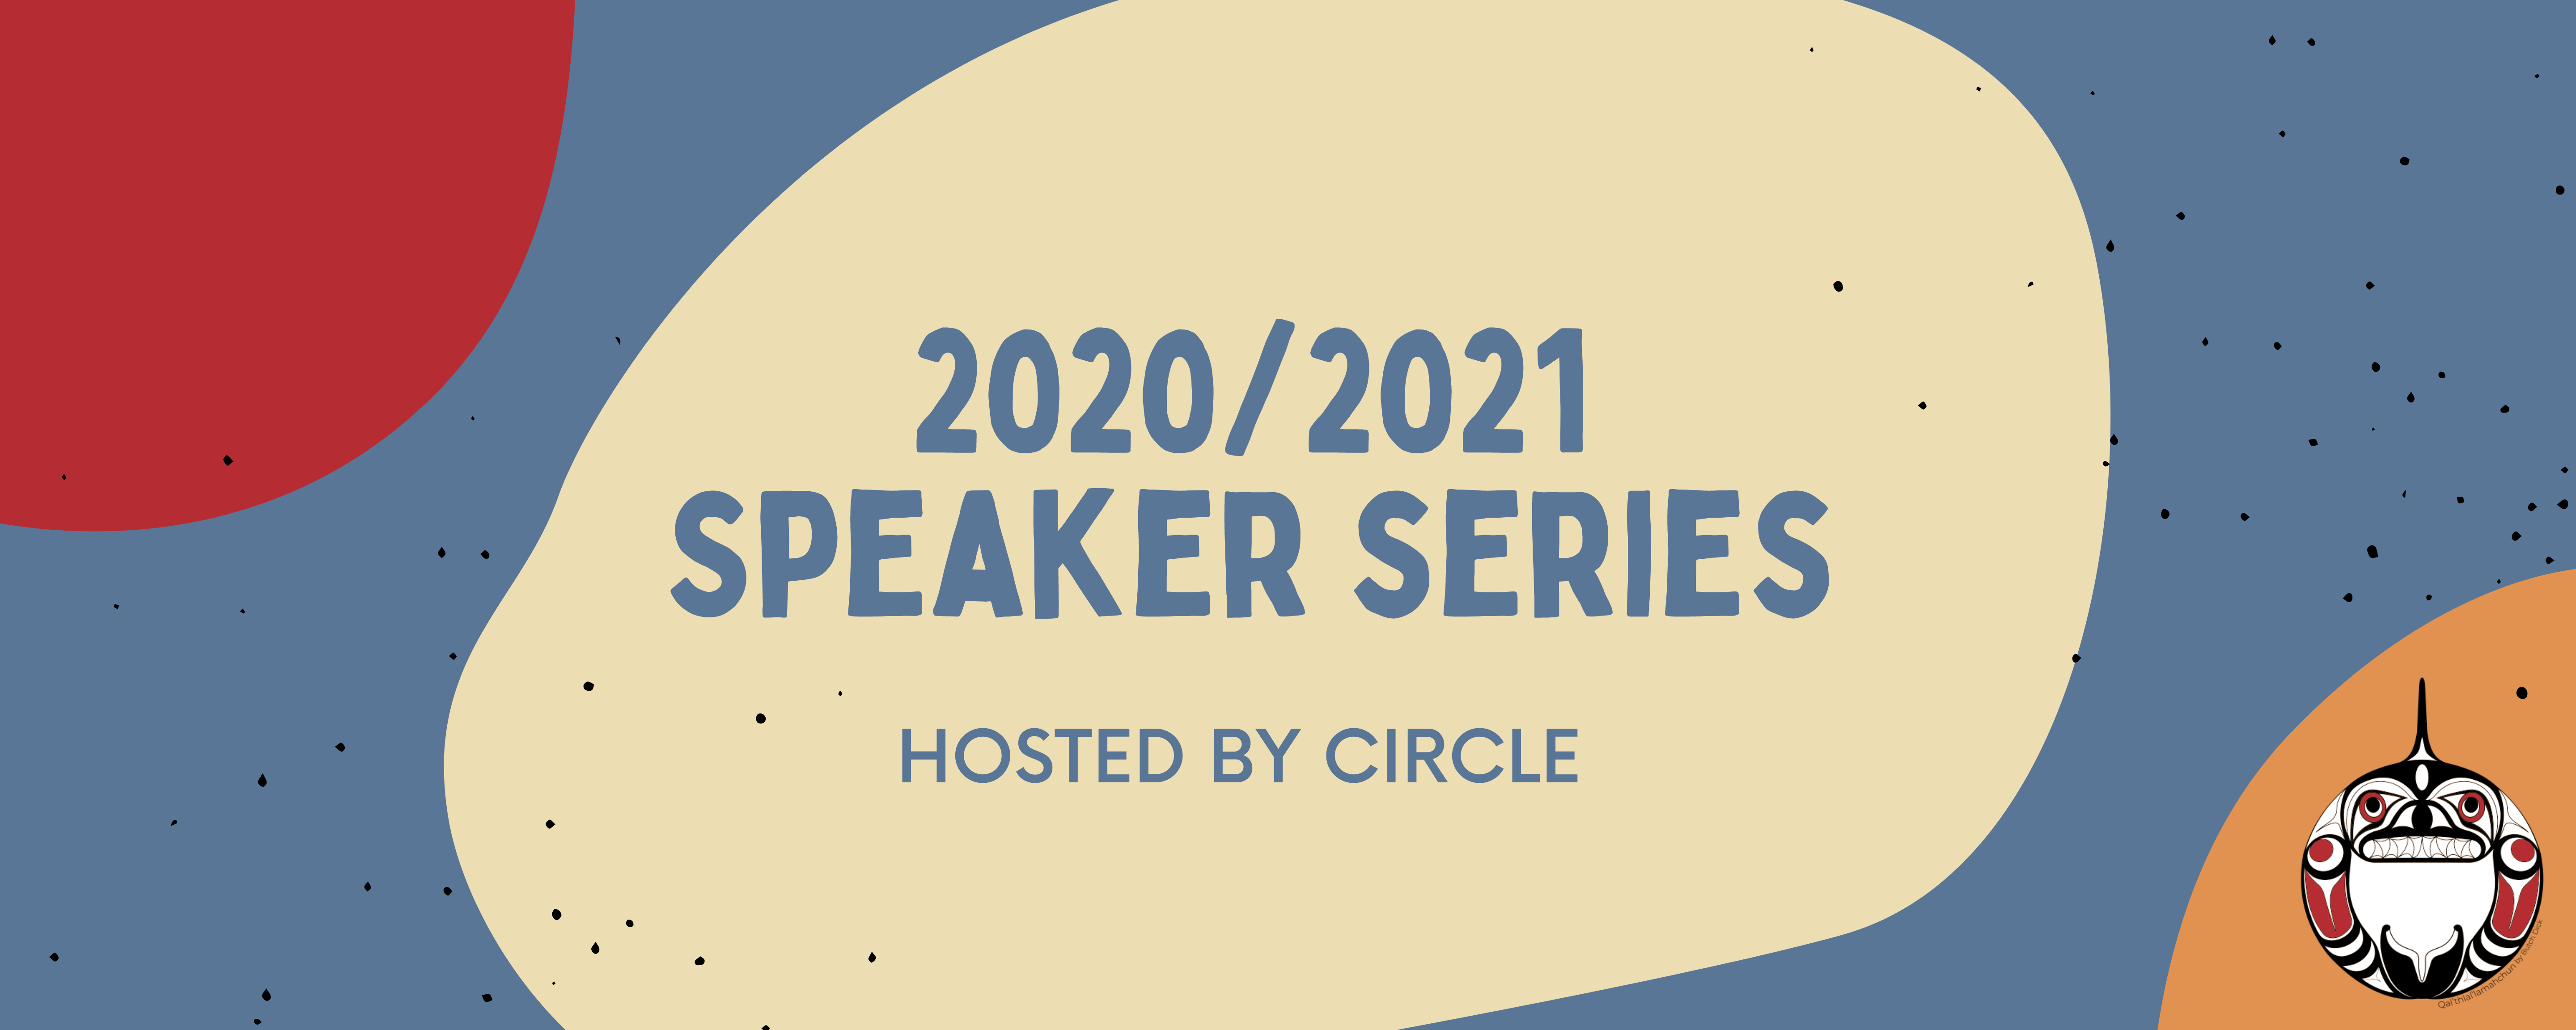 2020-2021 Speakers Series Hosted by CIRCLE